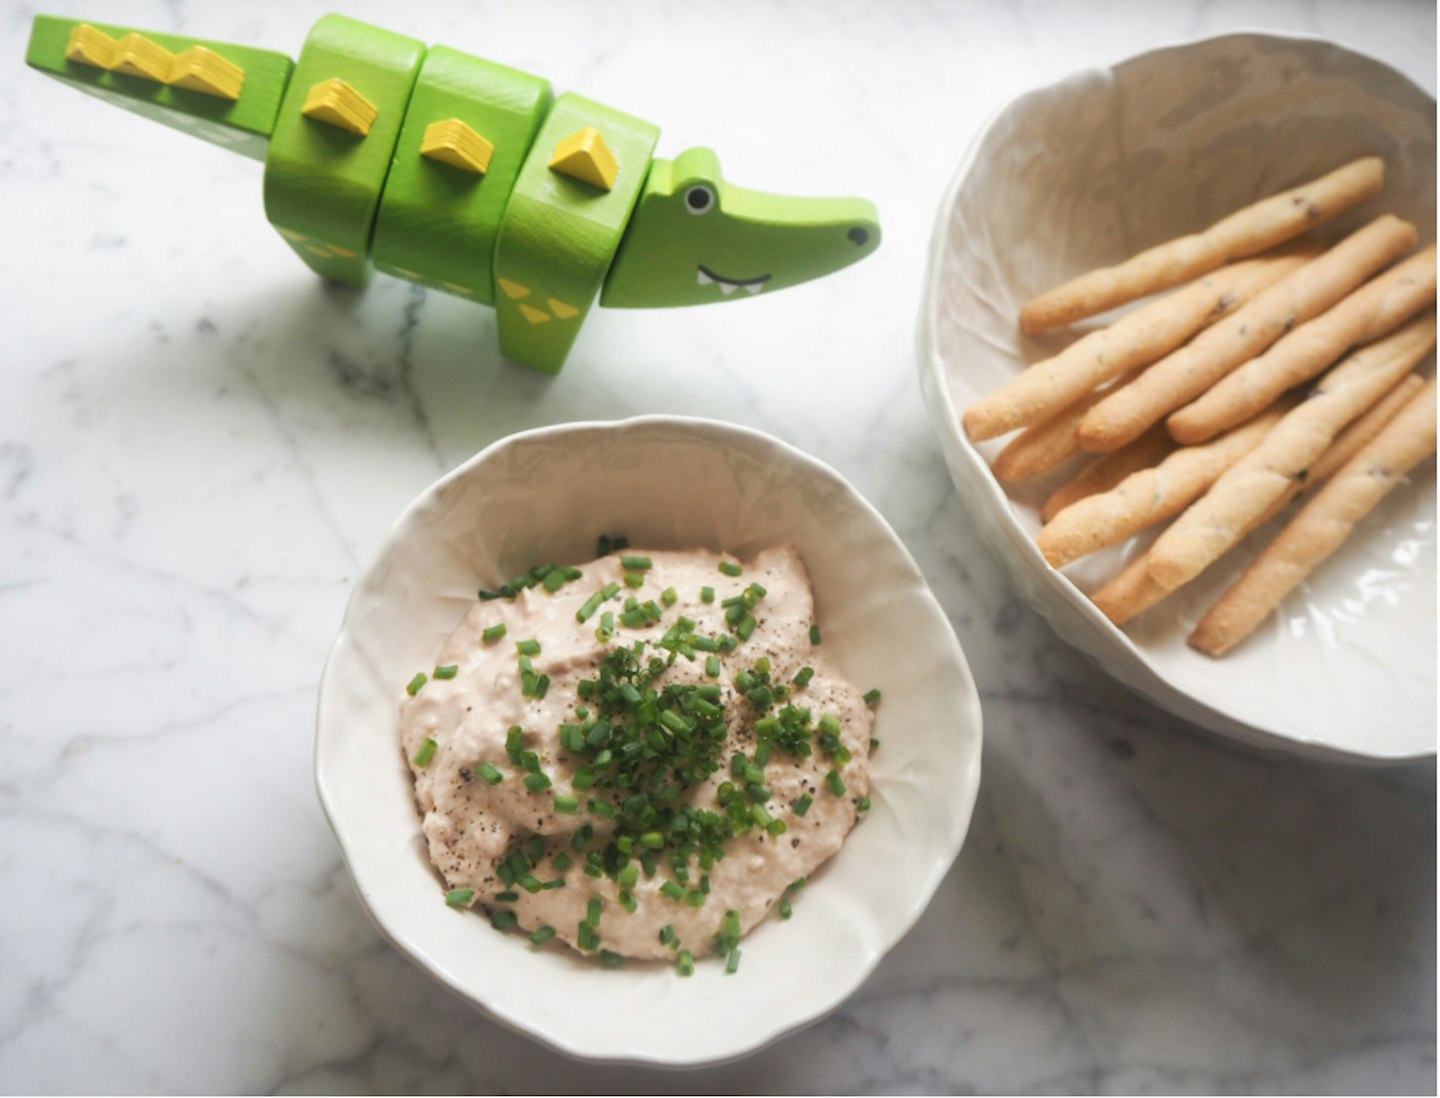 Mimi's tuna dip takes seconds to eat and is very healthy